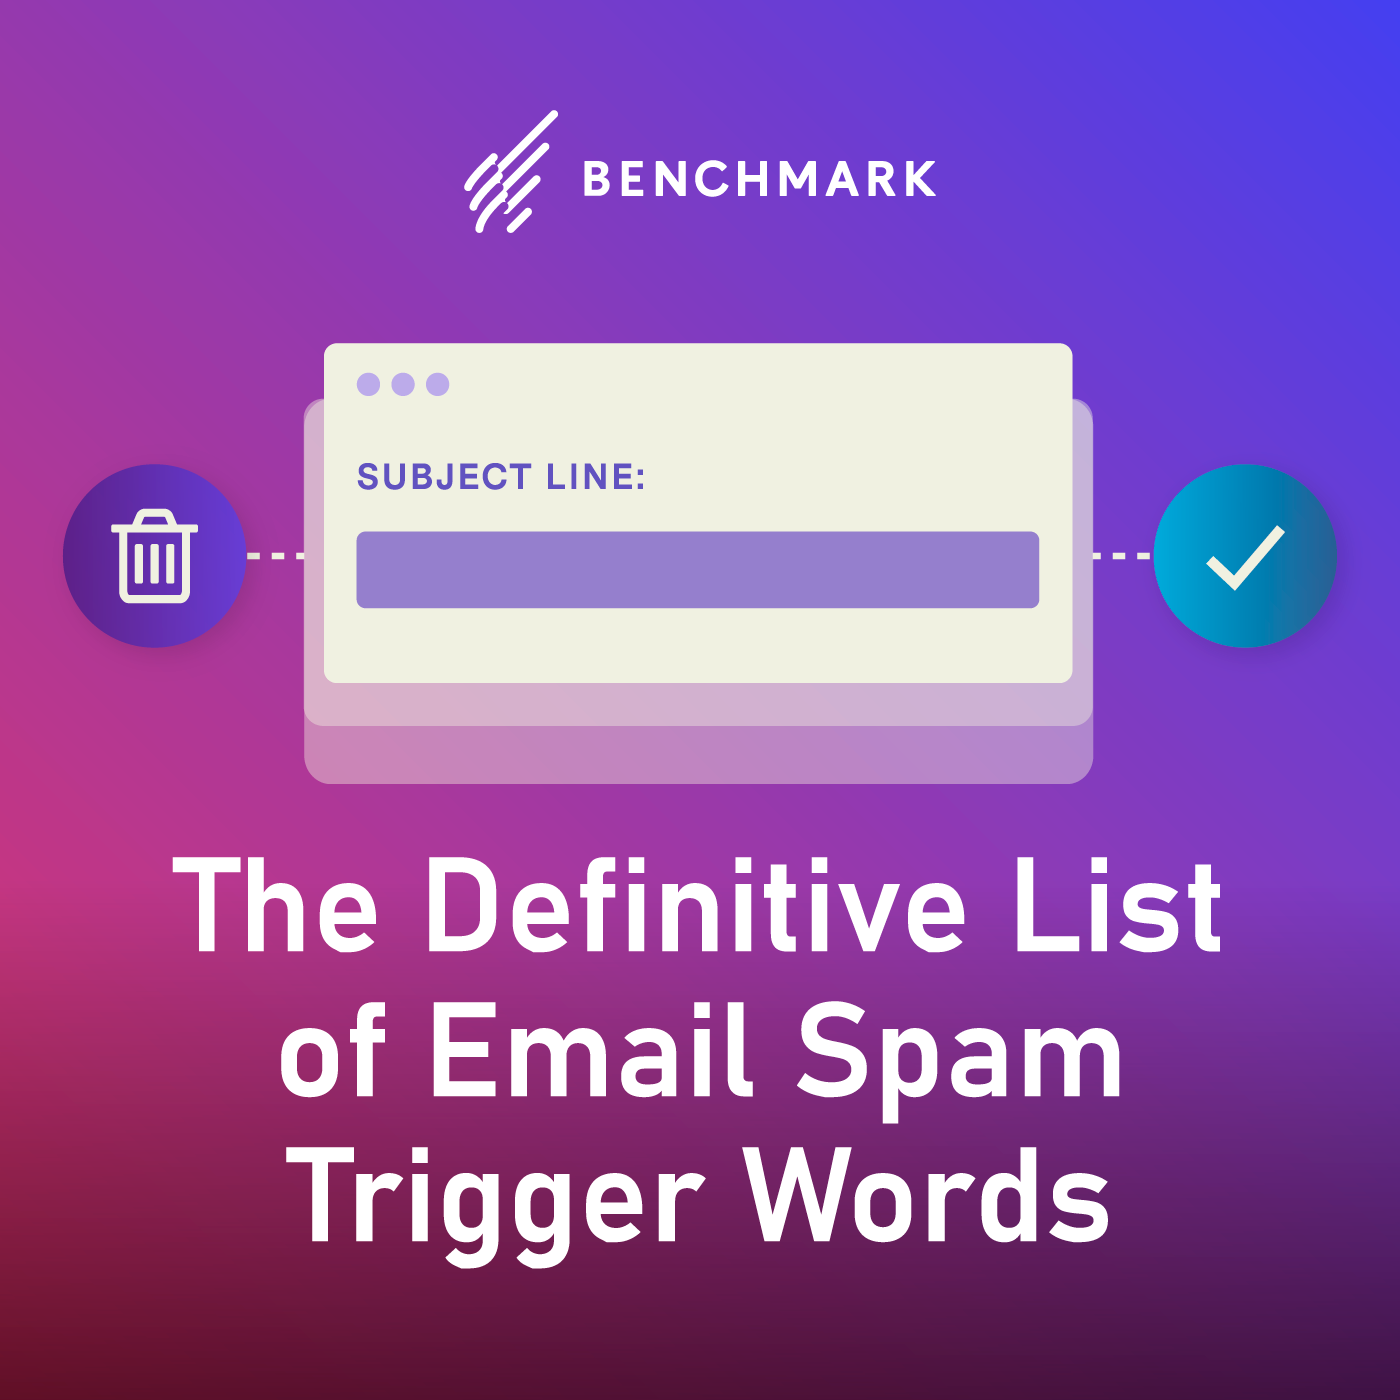 The Definitive List of Email Spam Trigger Words